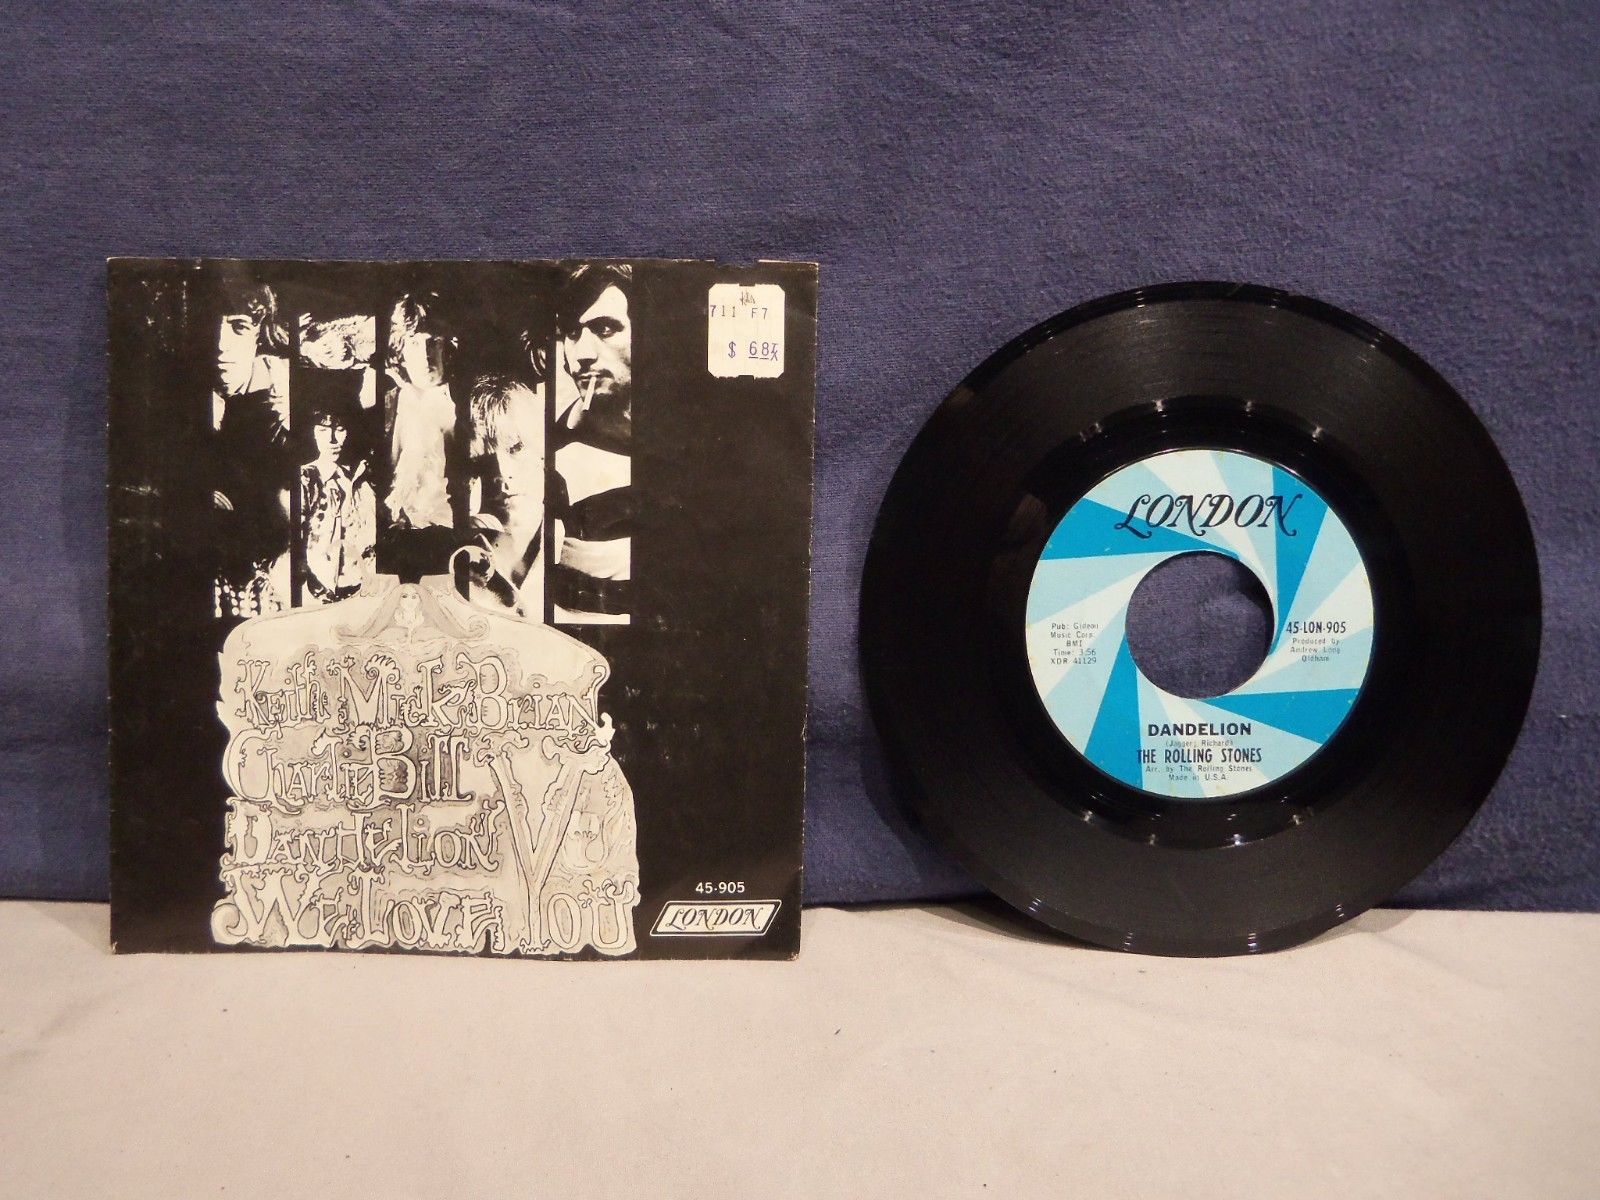 popsike.com - THE ROLLING STONES - DANDELION / WE LOVE YOU 45 RPM VINYL  RECORD w/ COVER SLEEVE - auction details